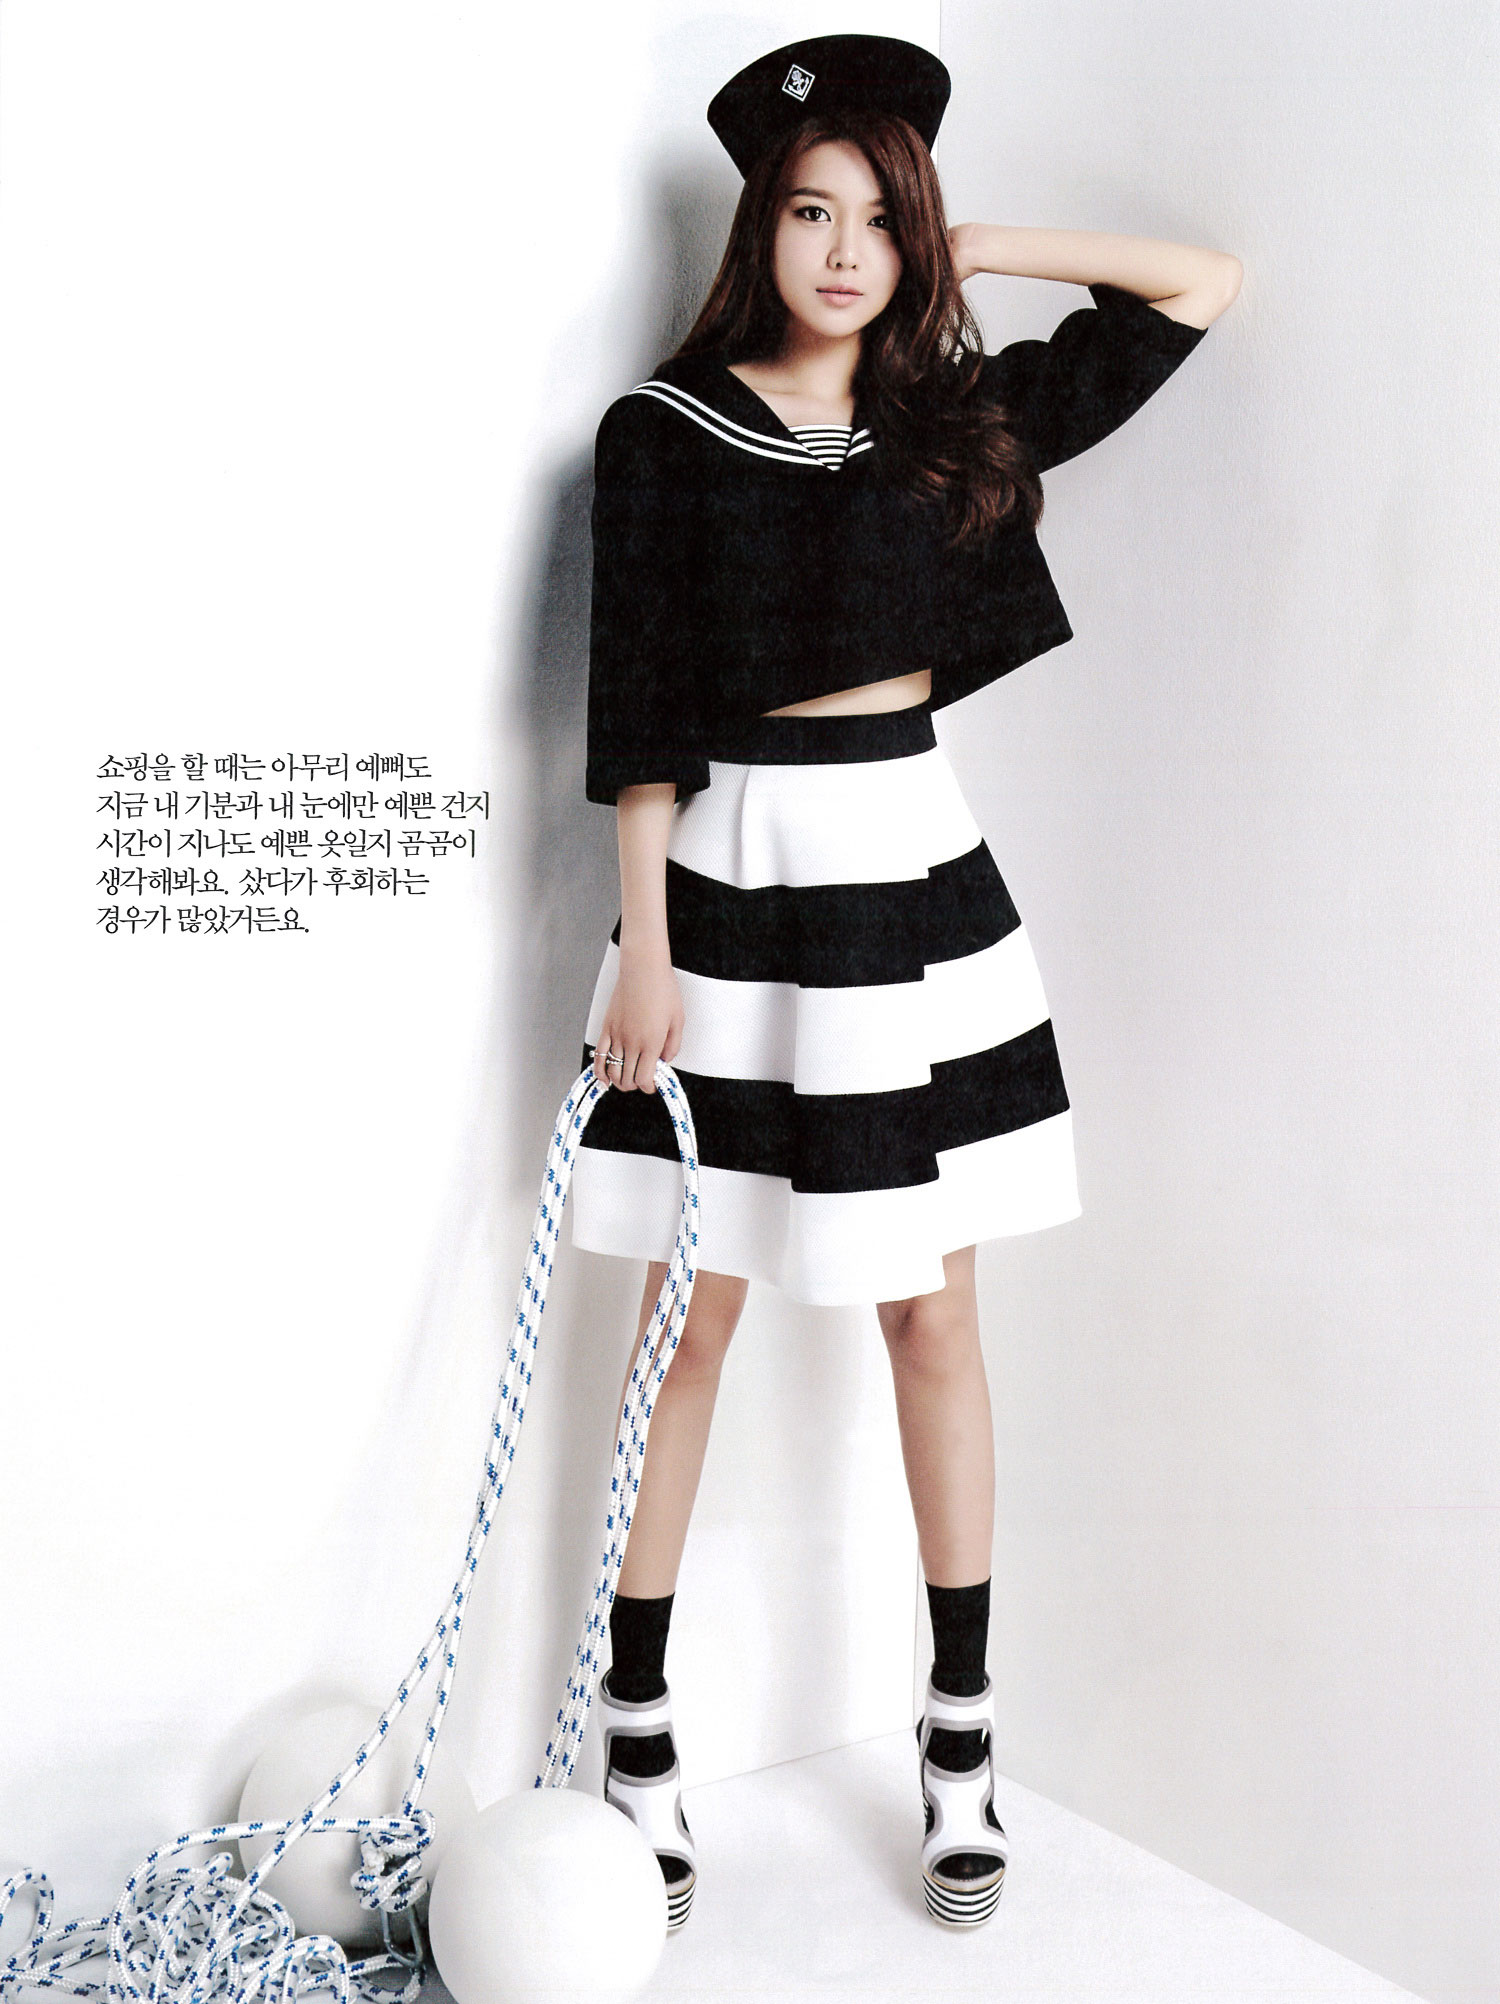 Sooyoung The Celebrity Magazine